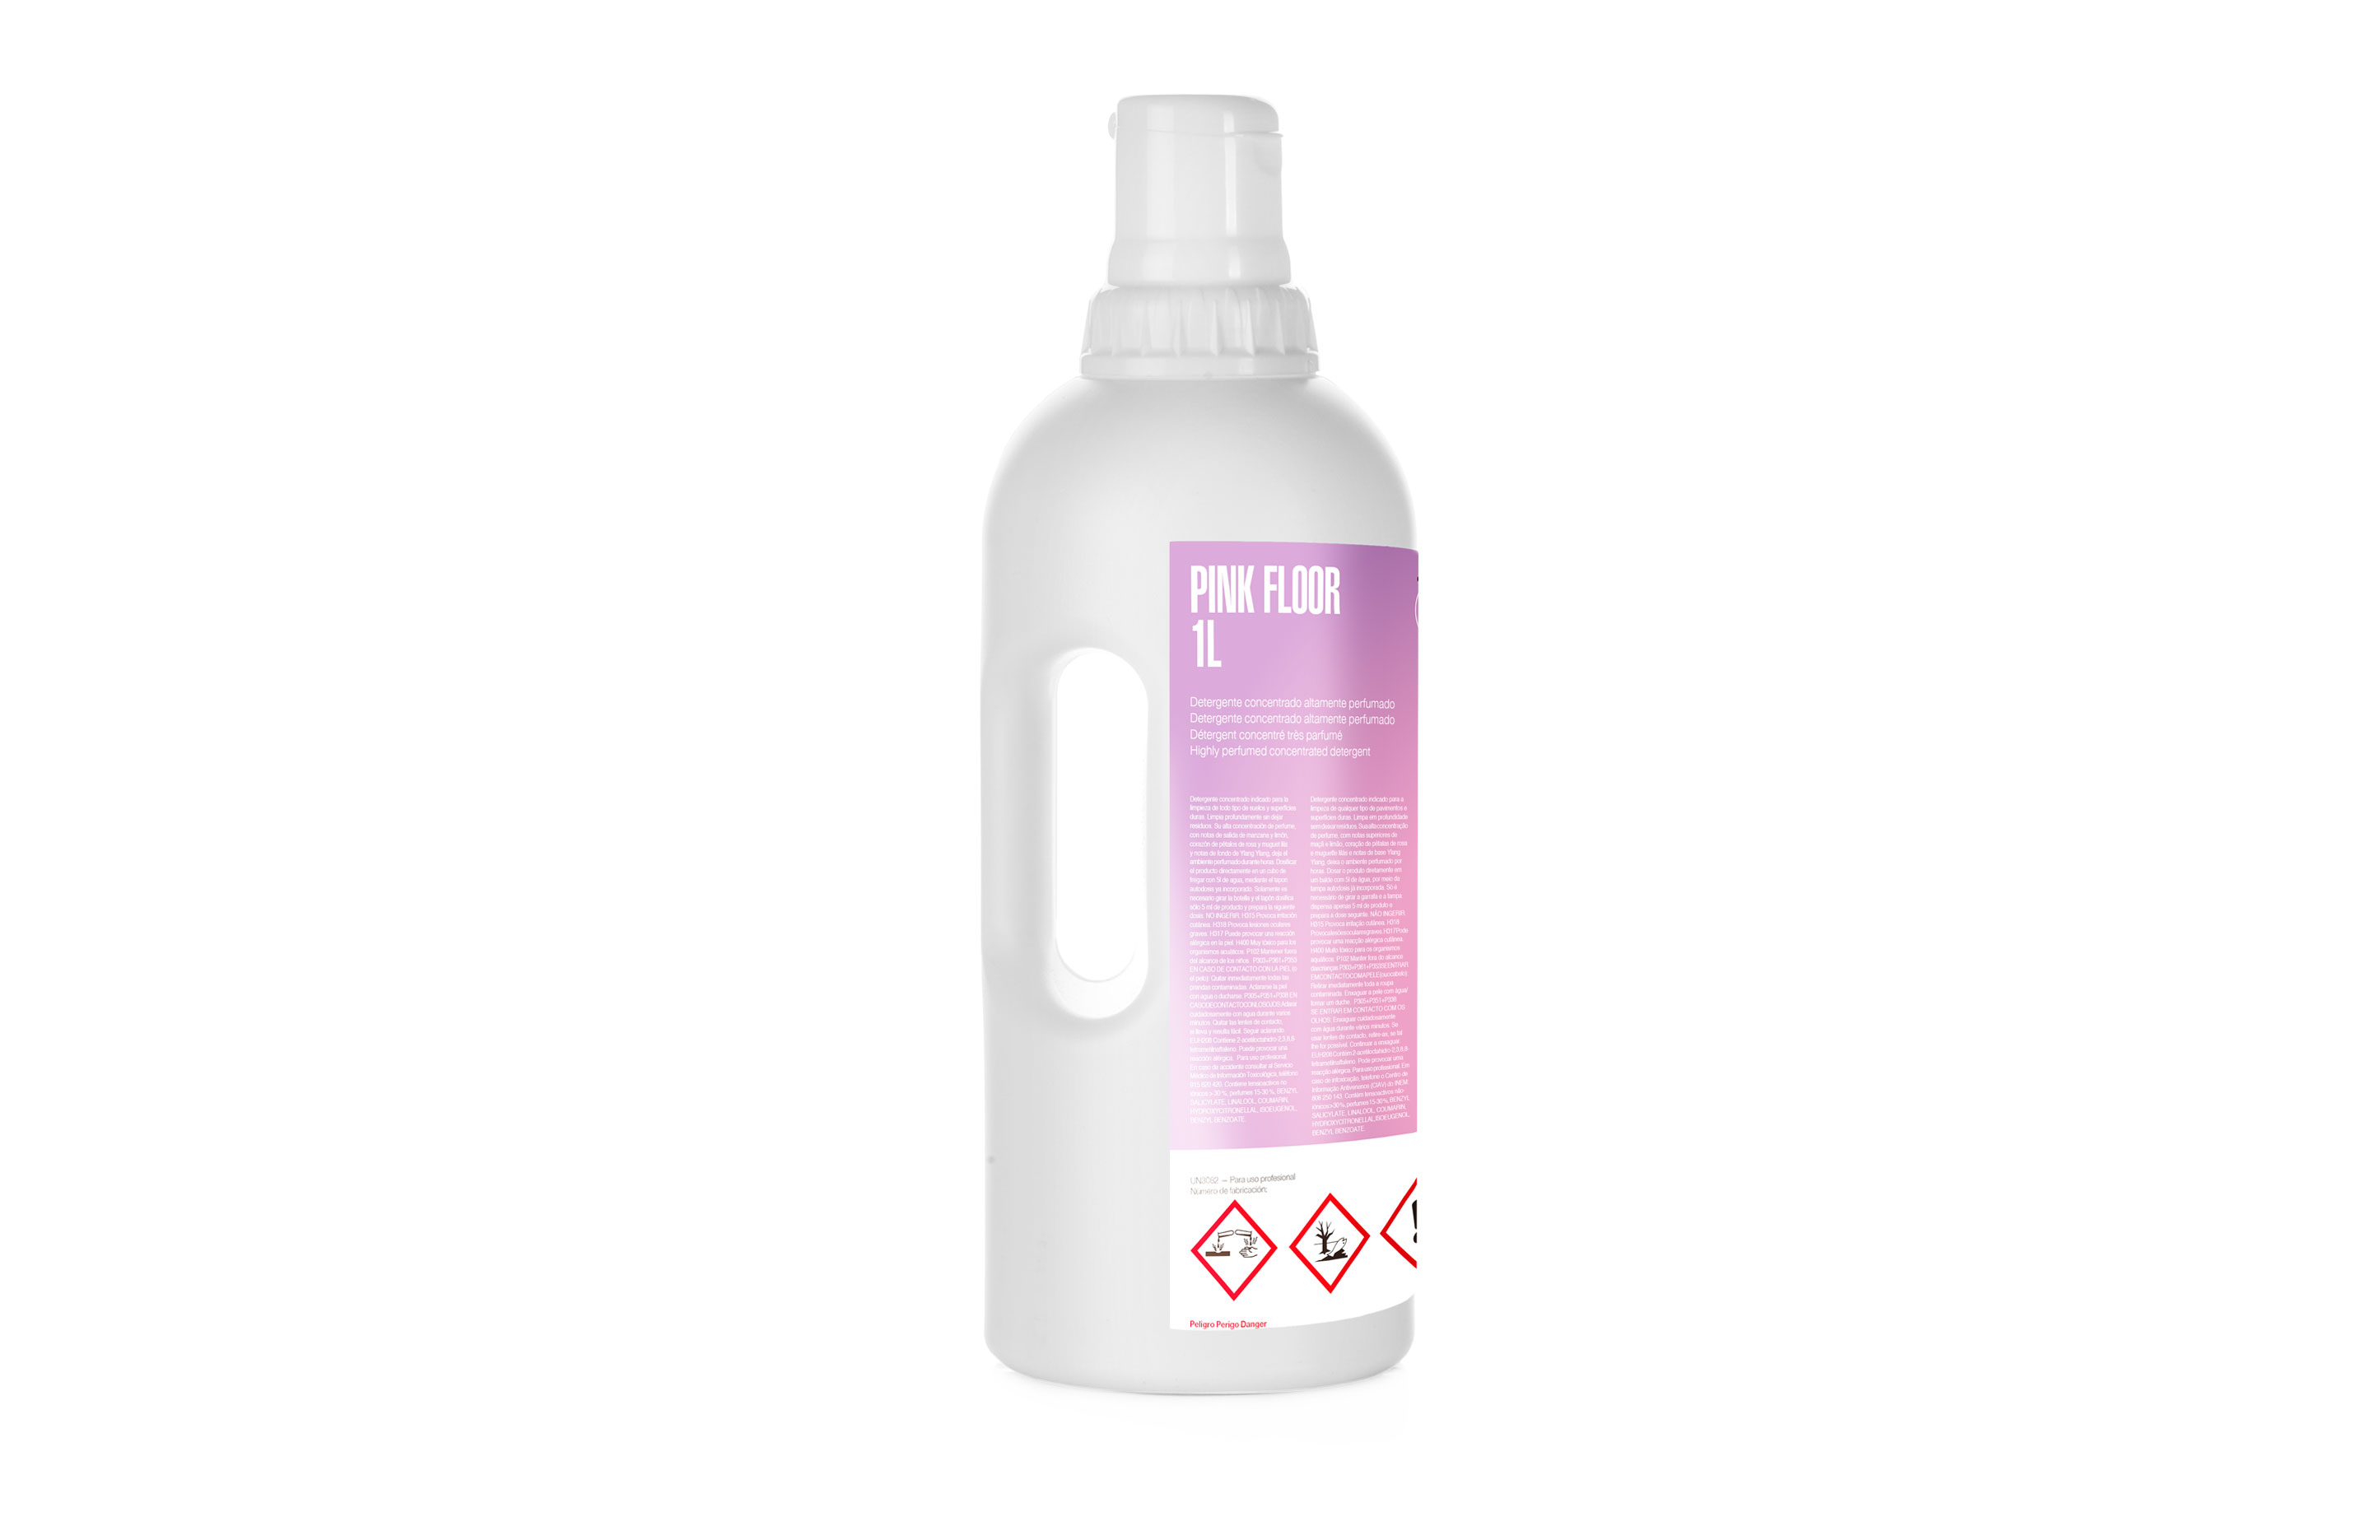 Pink Floor, Highly perfumed concentrated detergent